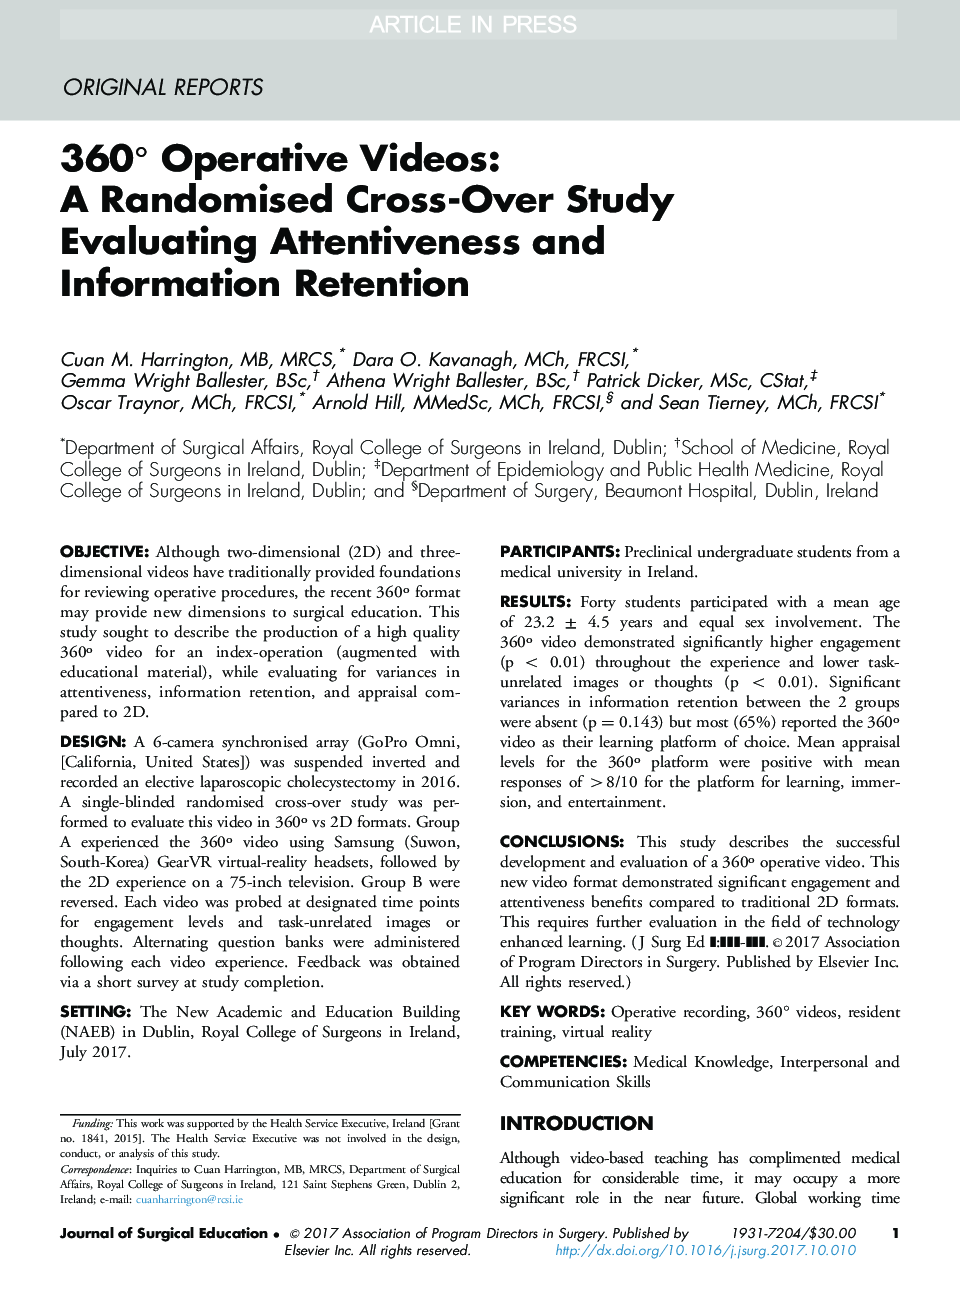 360Â° Operative Videos: A Randomised Cross-Over Study Evaluating Attentiveness and Information Retention